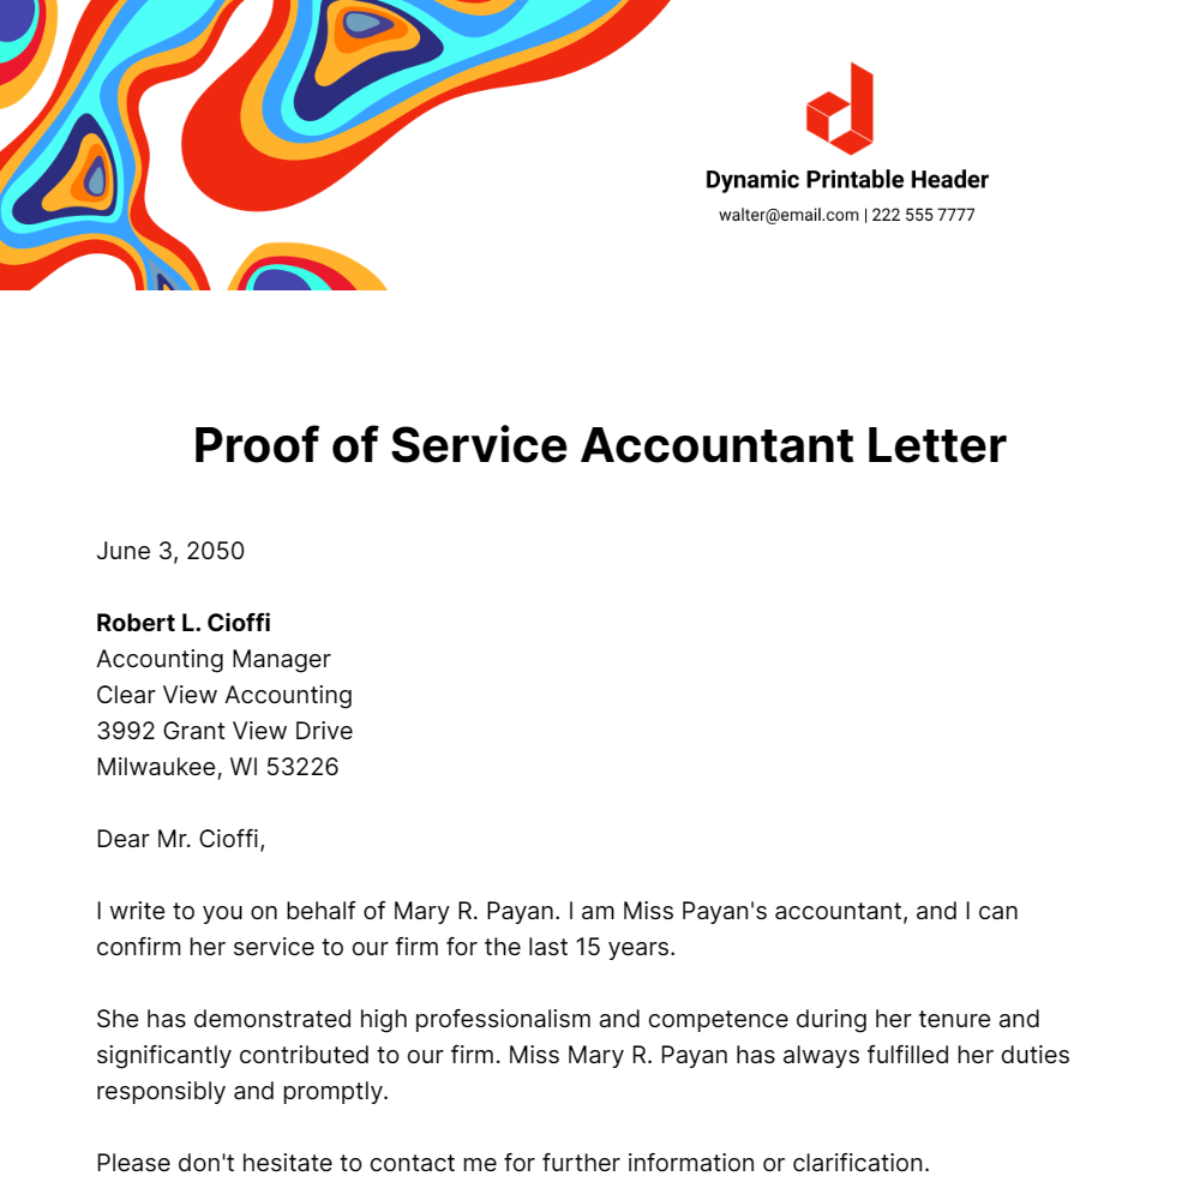 Proof of Service Accountant Letter Template